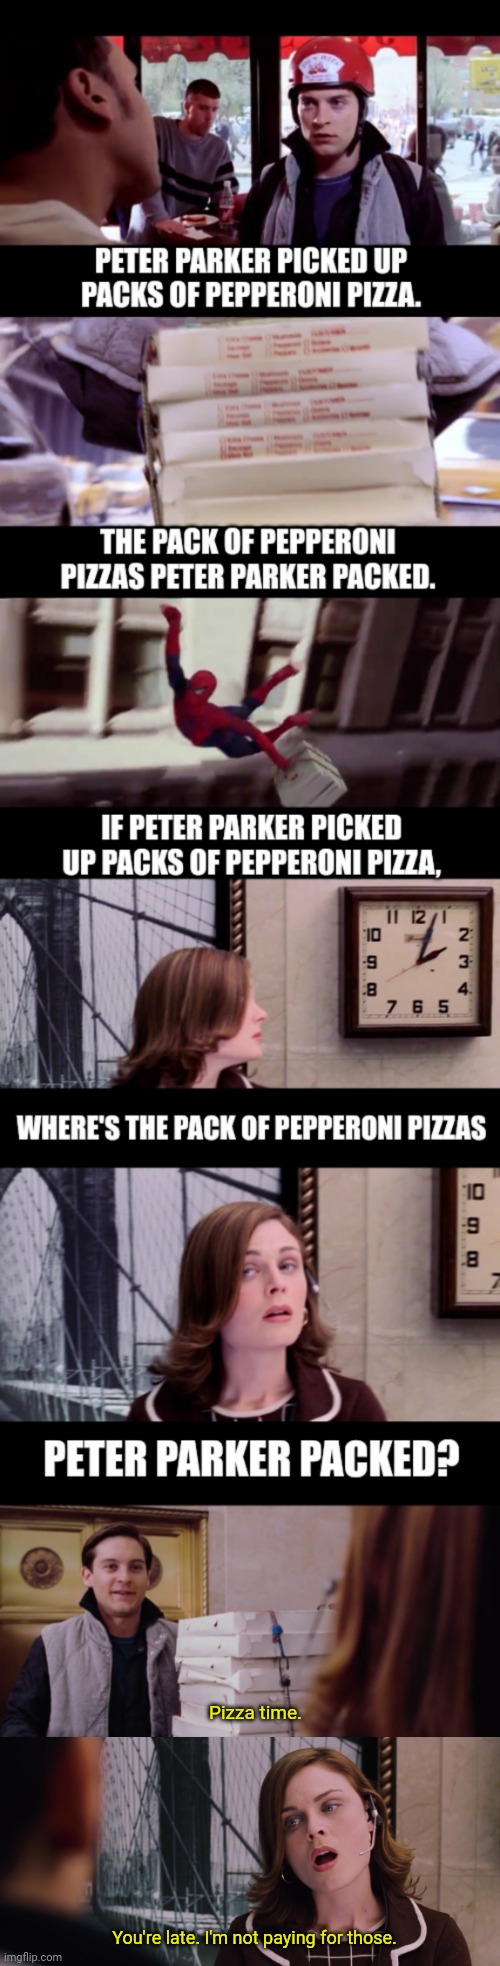 Peter Parker | Pizza time. You're late. I'm not paying for those. | image tagged in peter parker,pizza time,spiderman peter parker | made w/ Imgflip meme maker